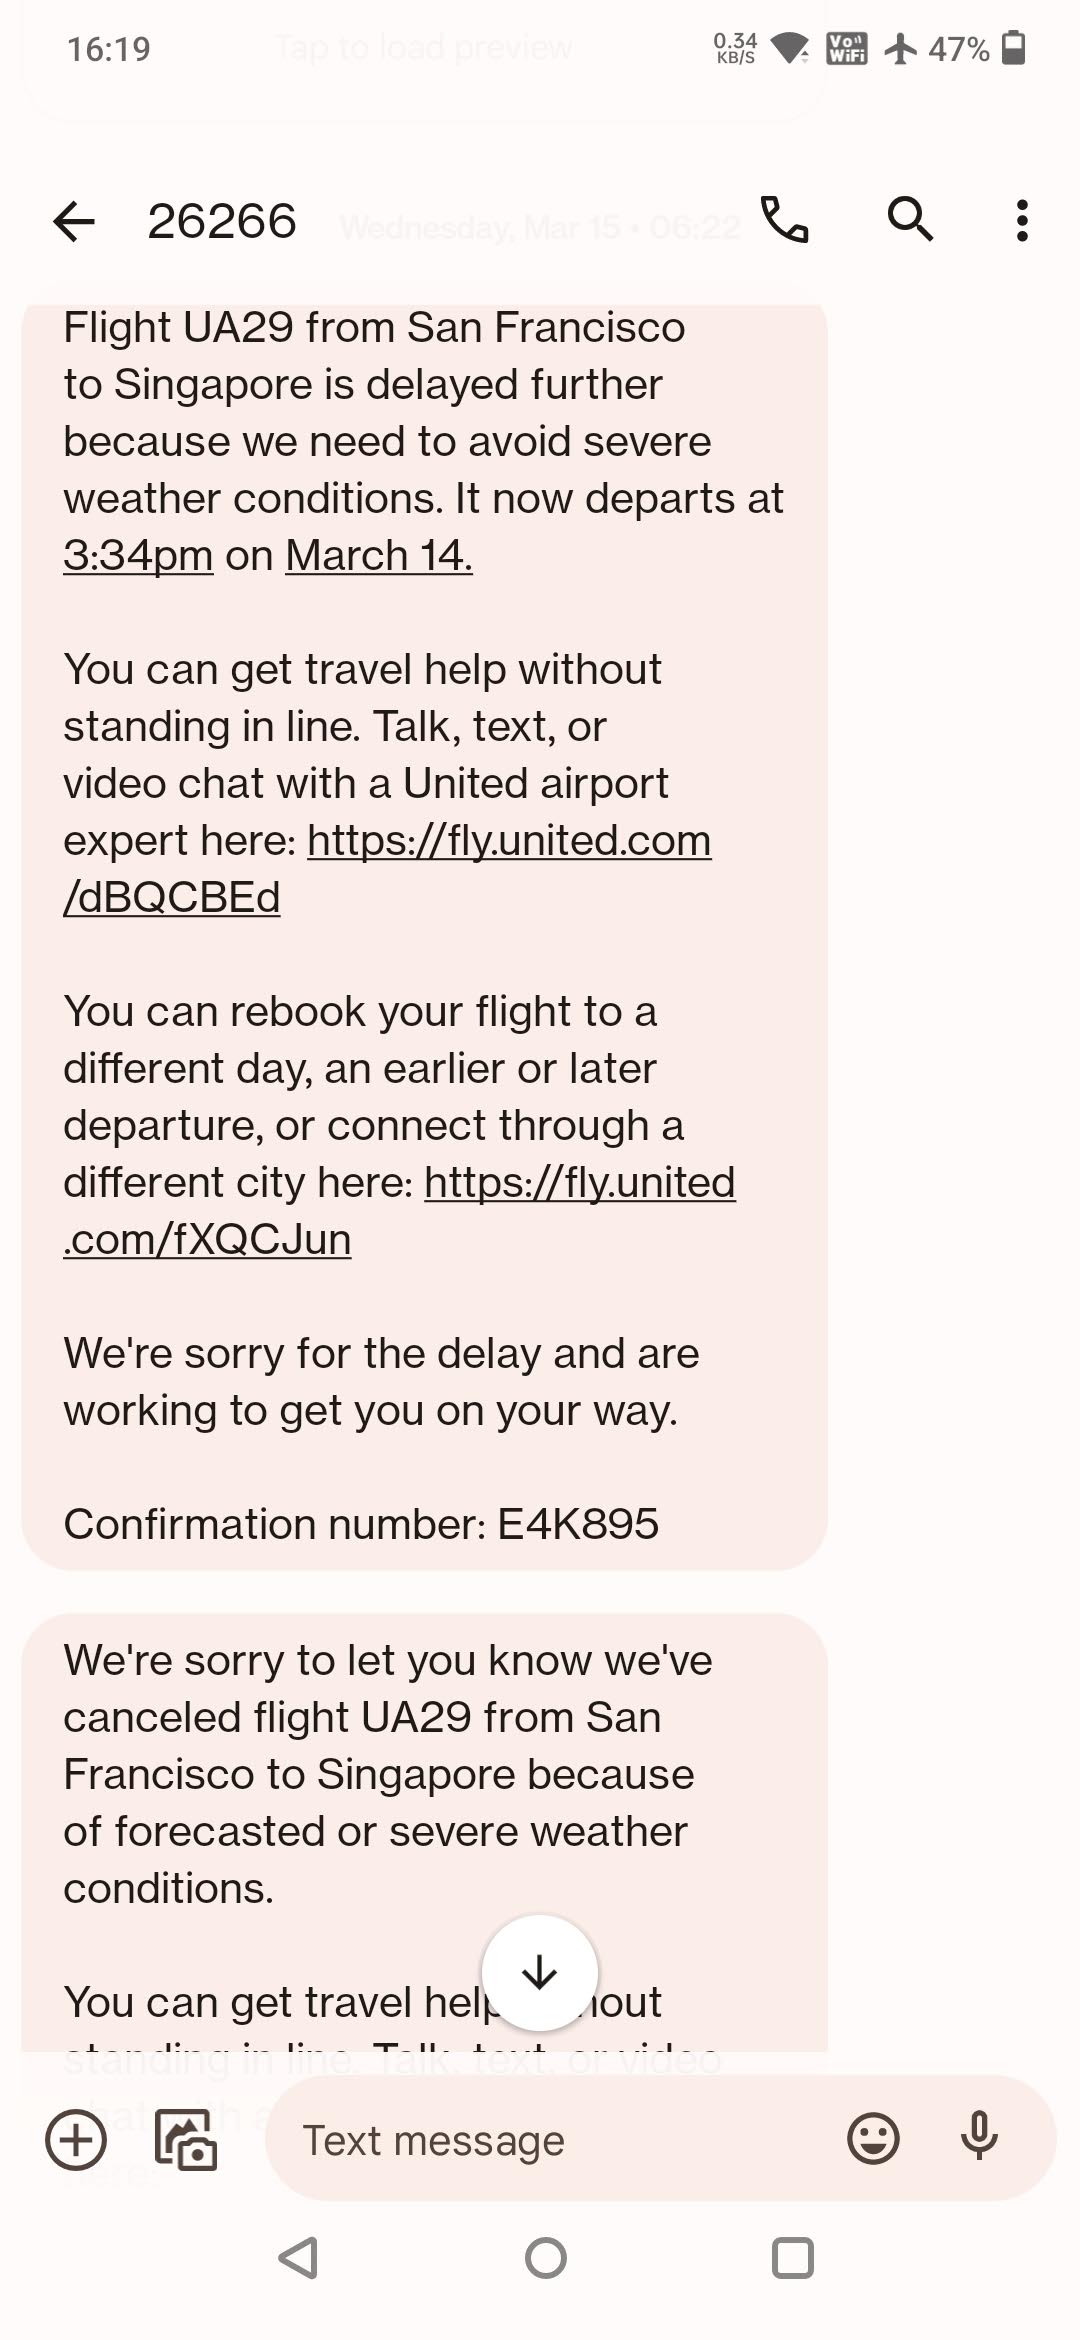 United text message support - 1